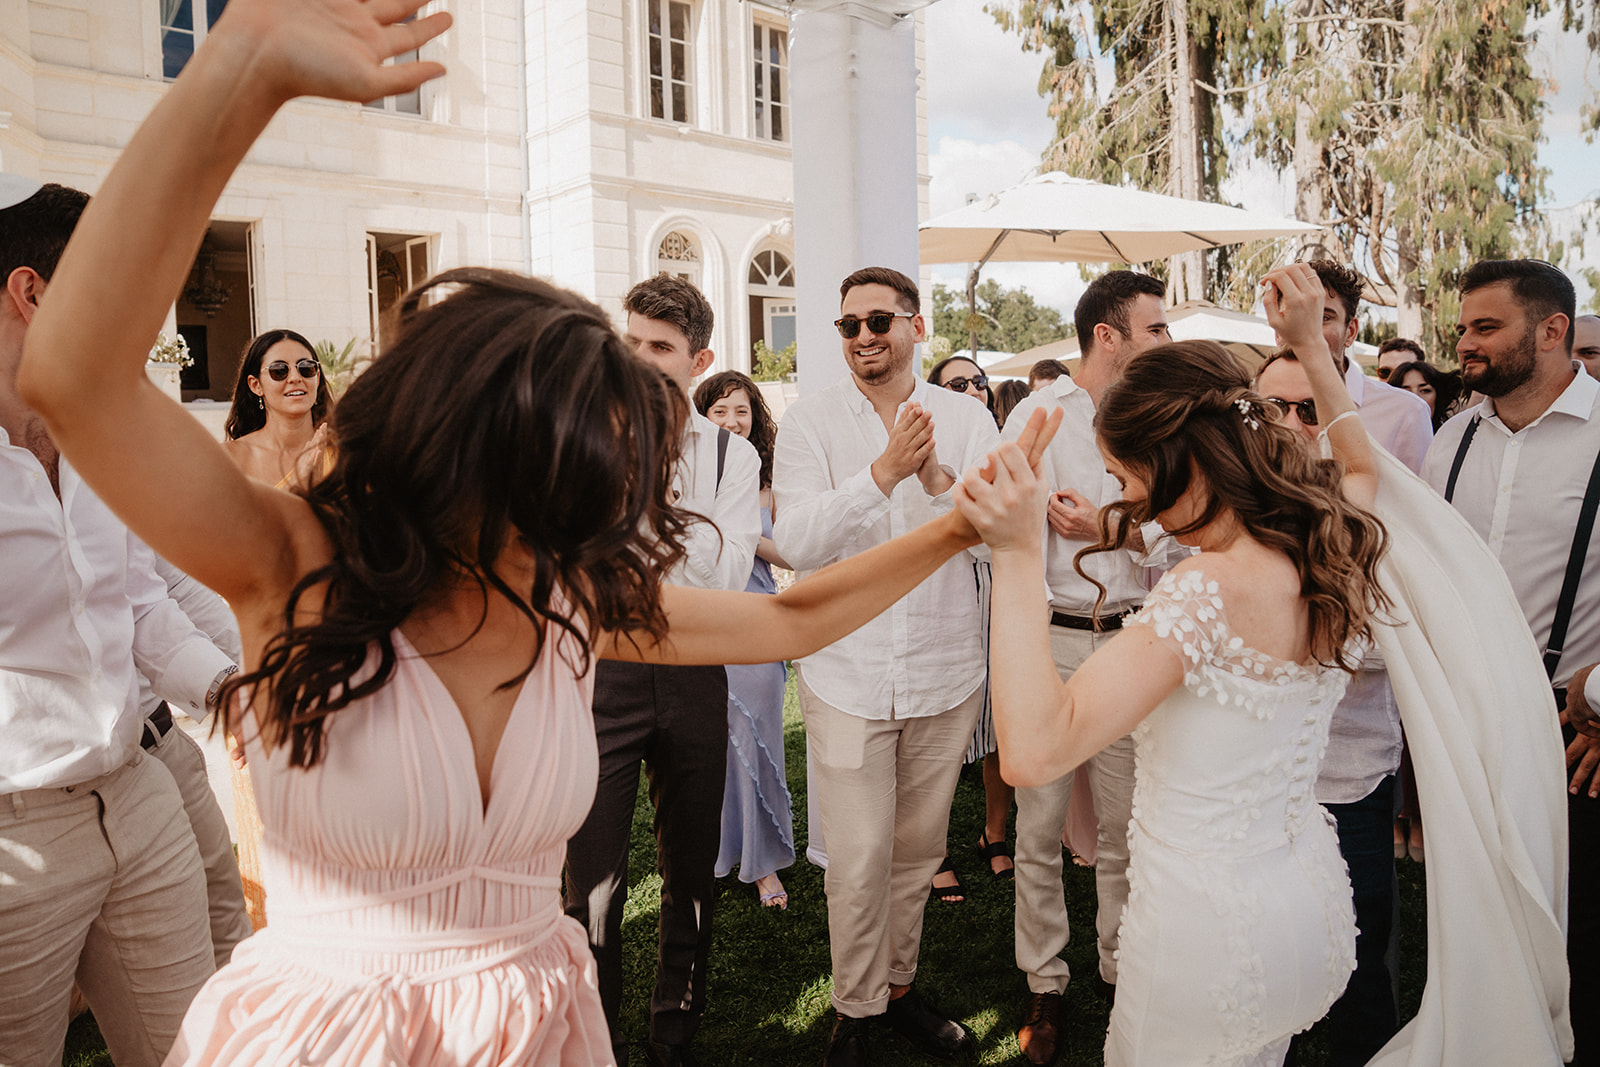 French wedding photos and video duo Bordeaux